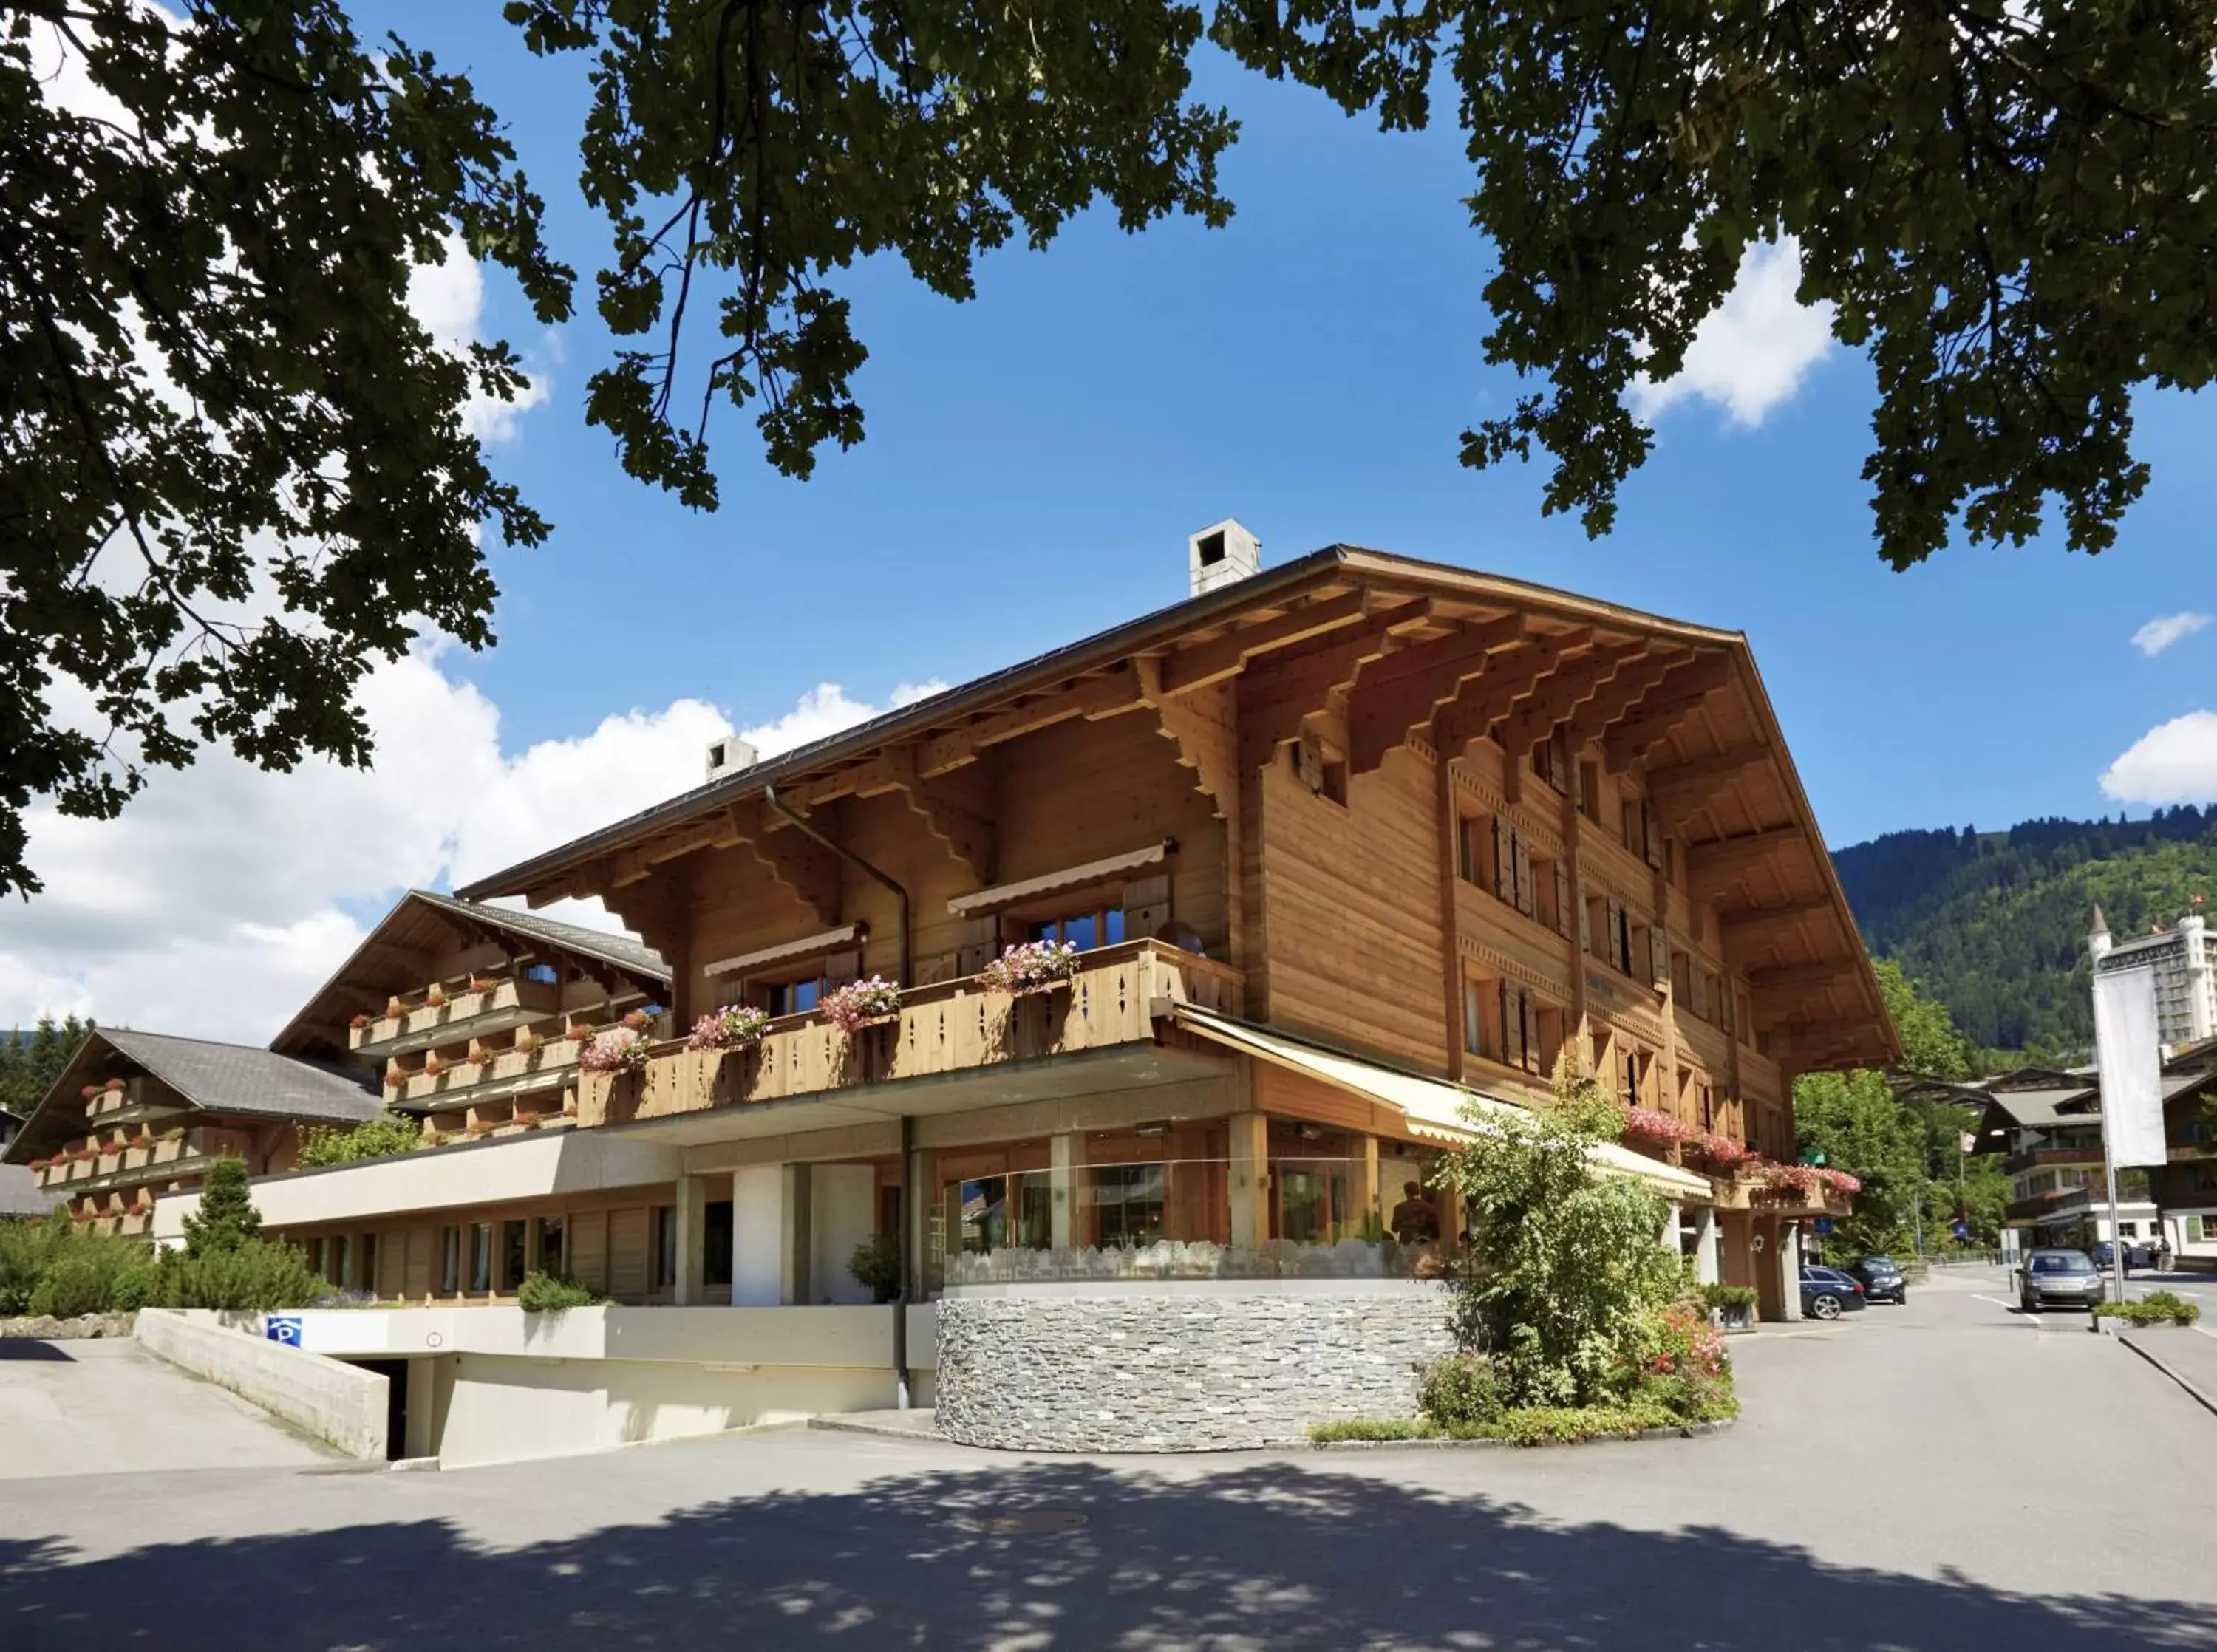 Property Building in Gstaaderhof - Active & Relax Hotel